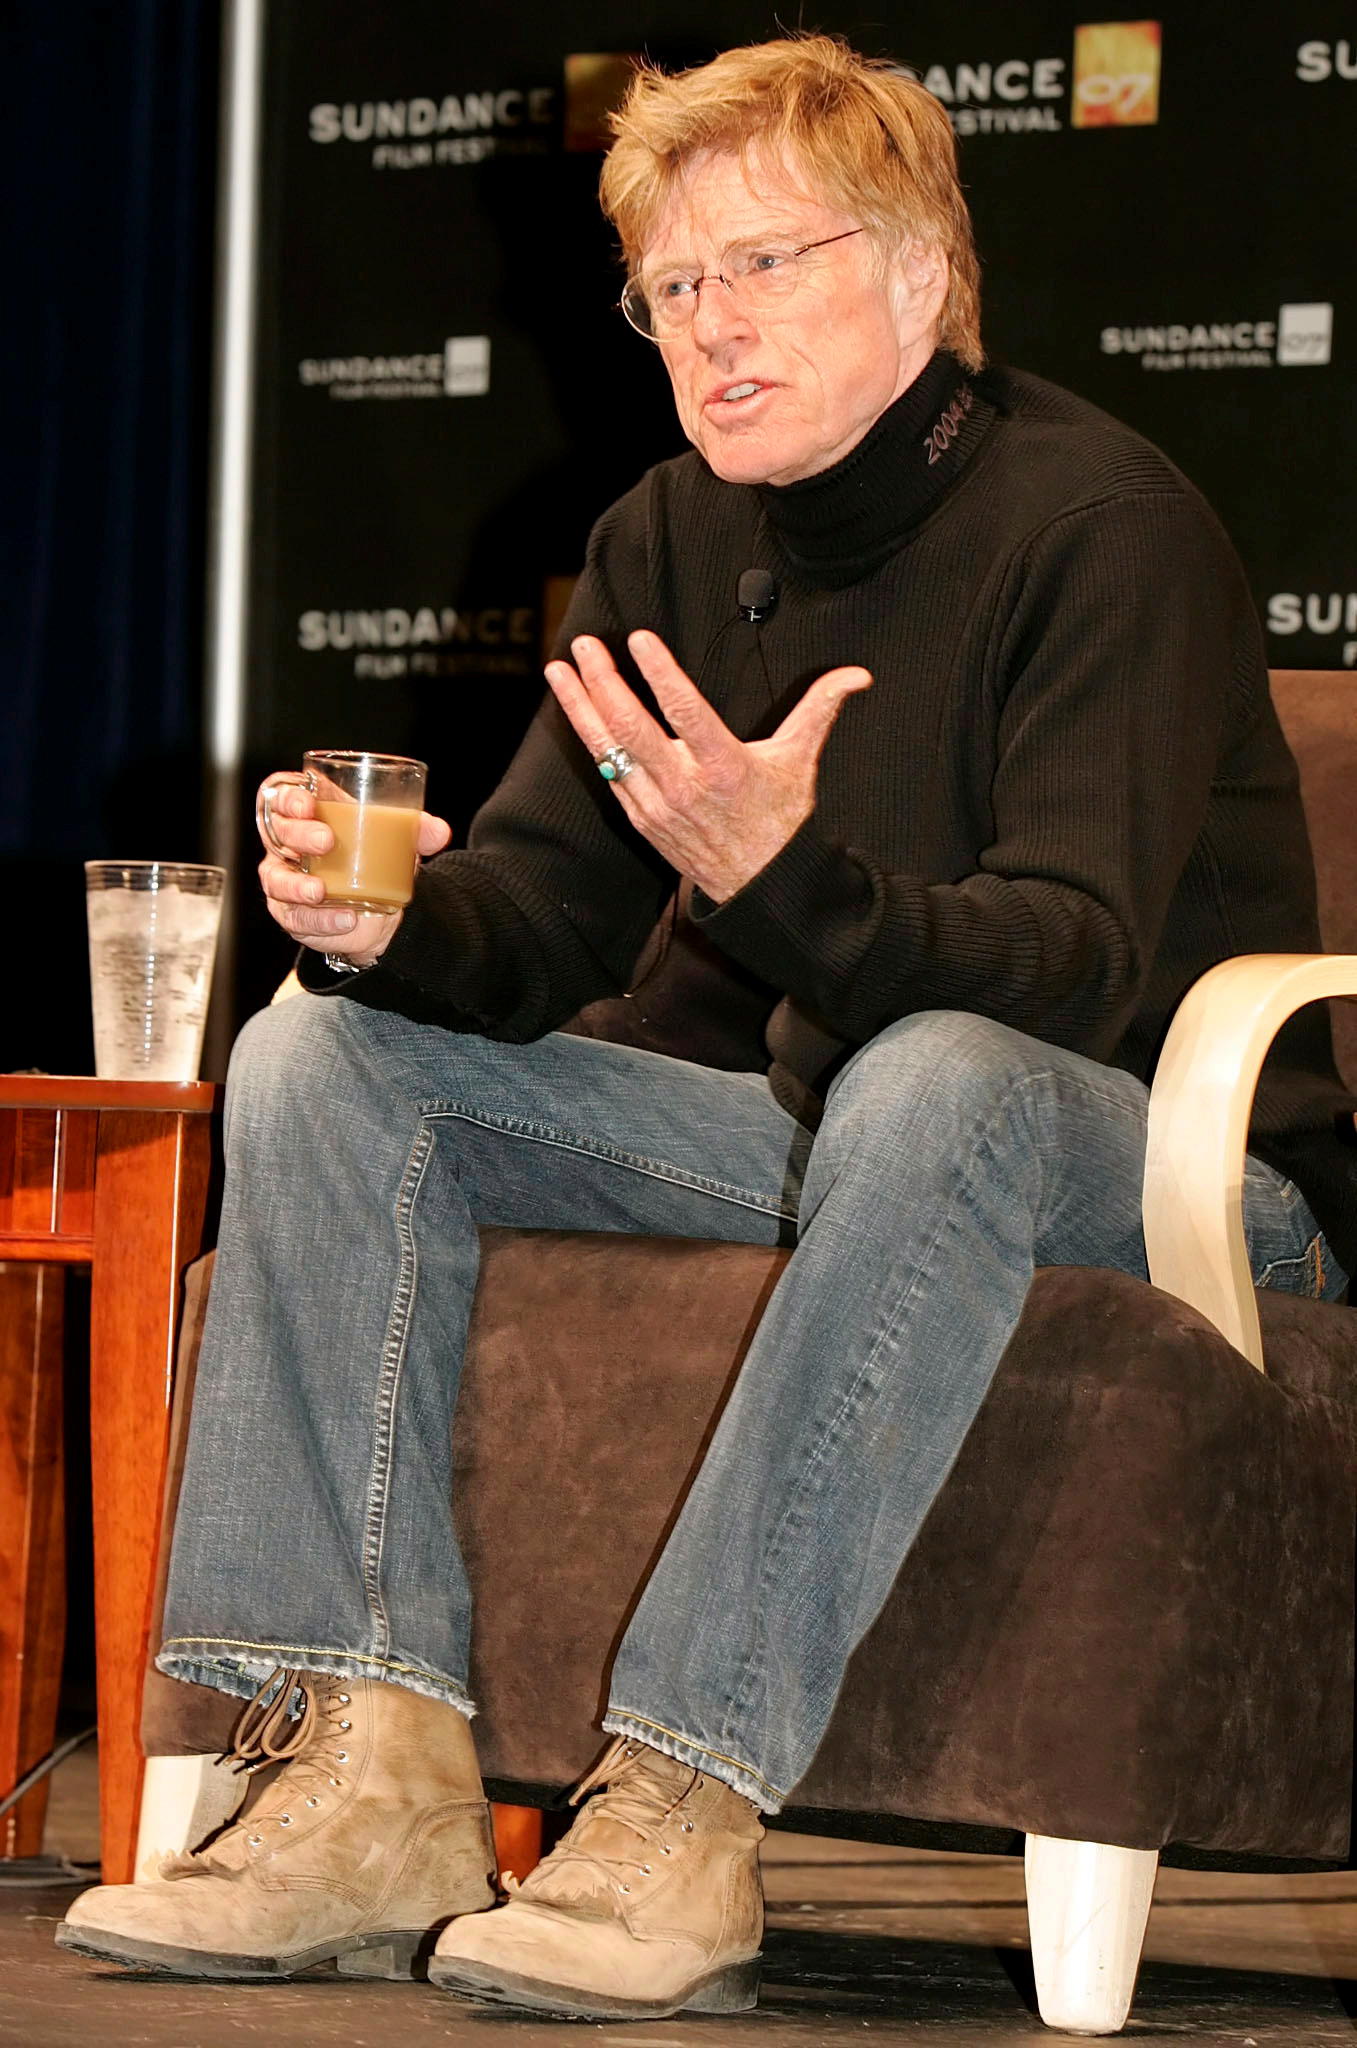 Redford answers questions during a press conference to open the 2007 Sundance Film Festival in Park City, Utah.